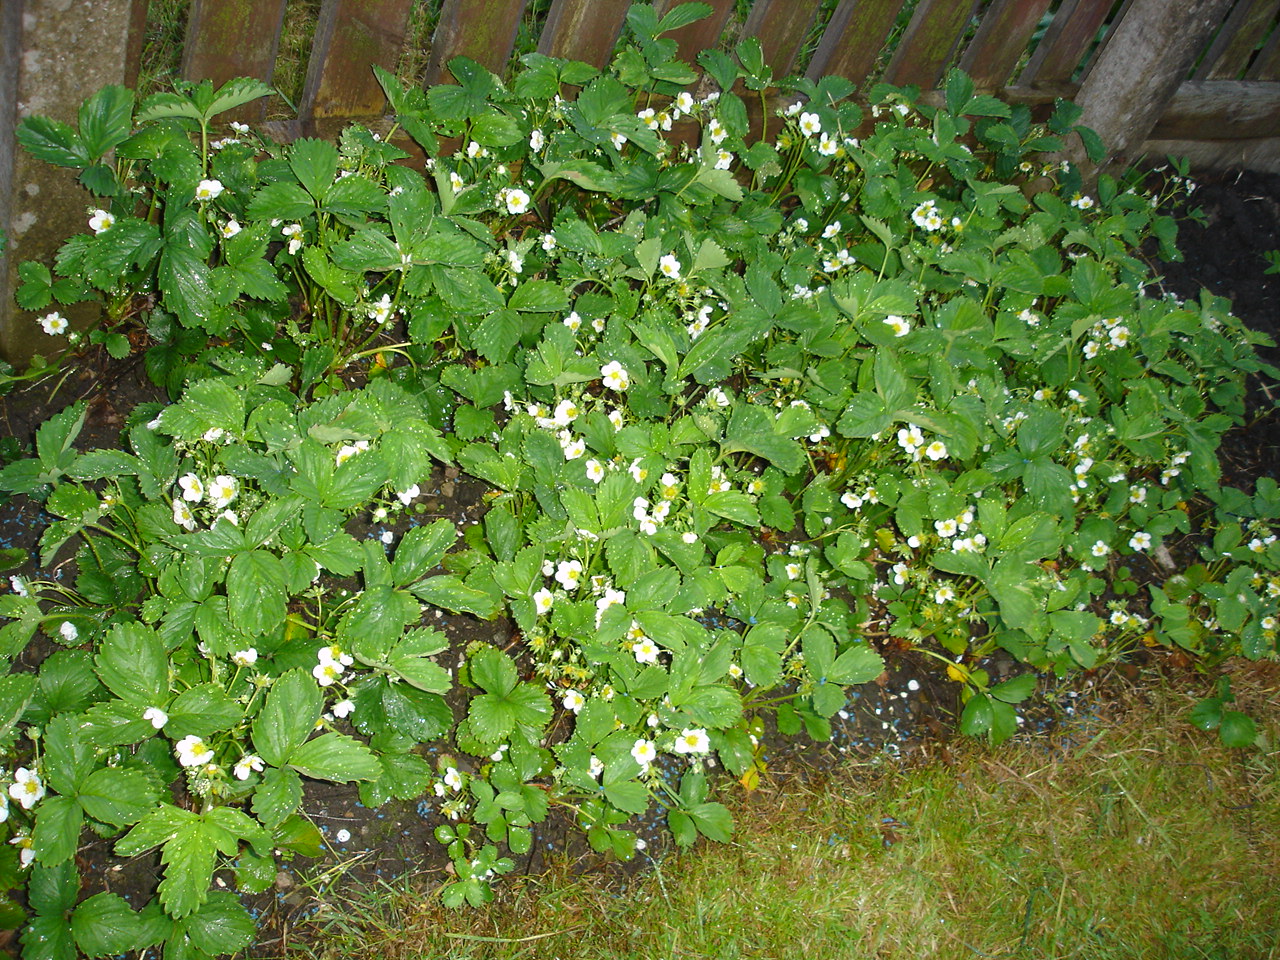 Strawberry patch watered